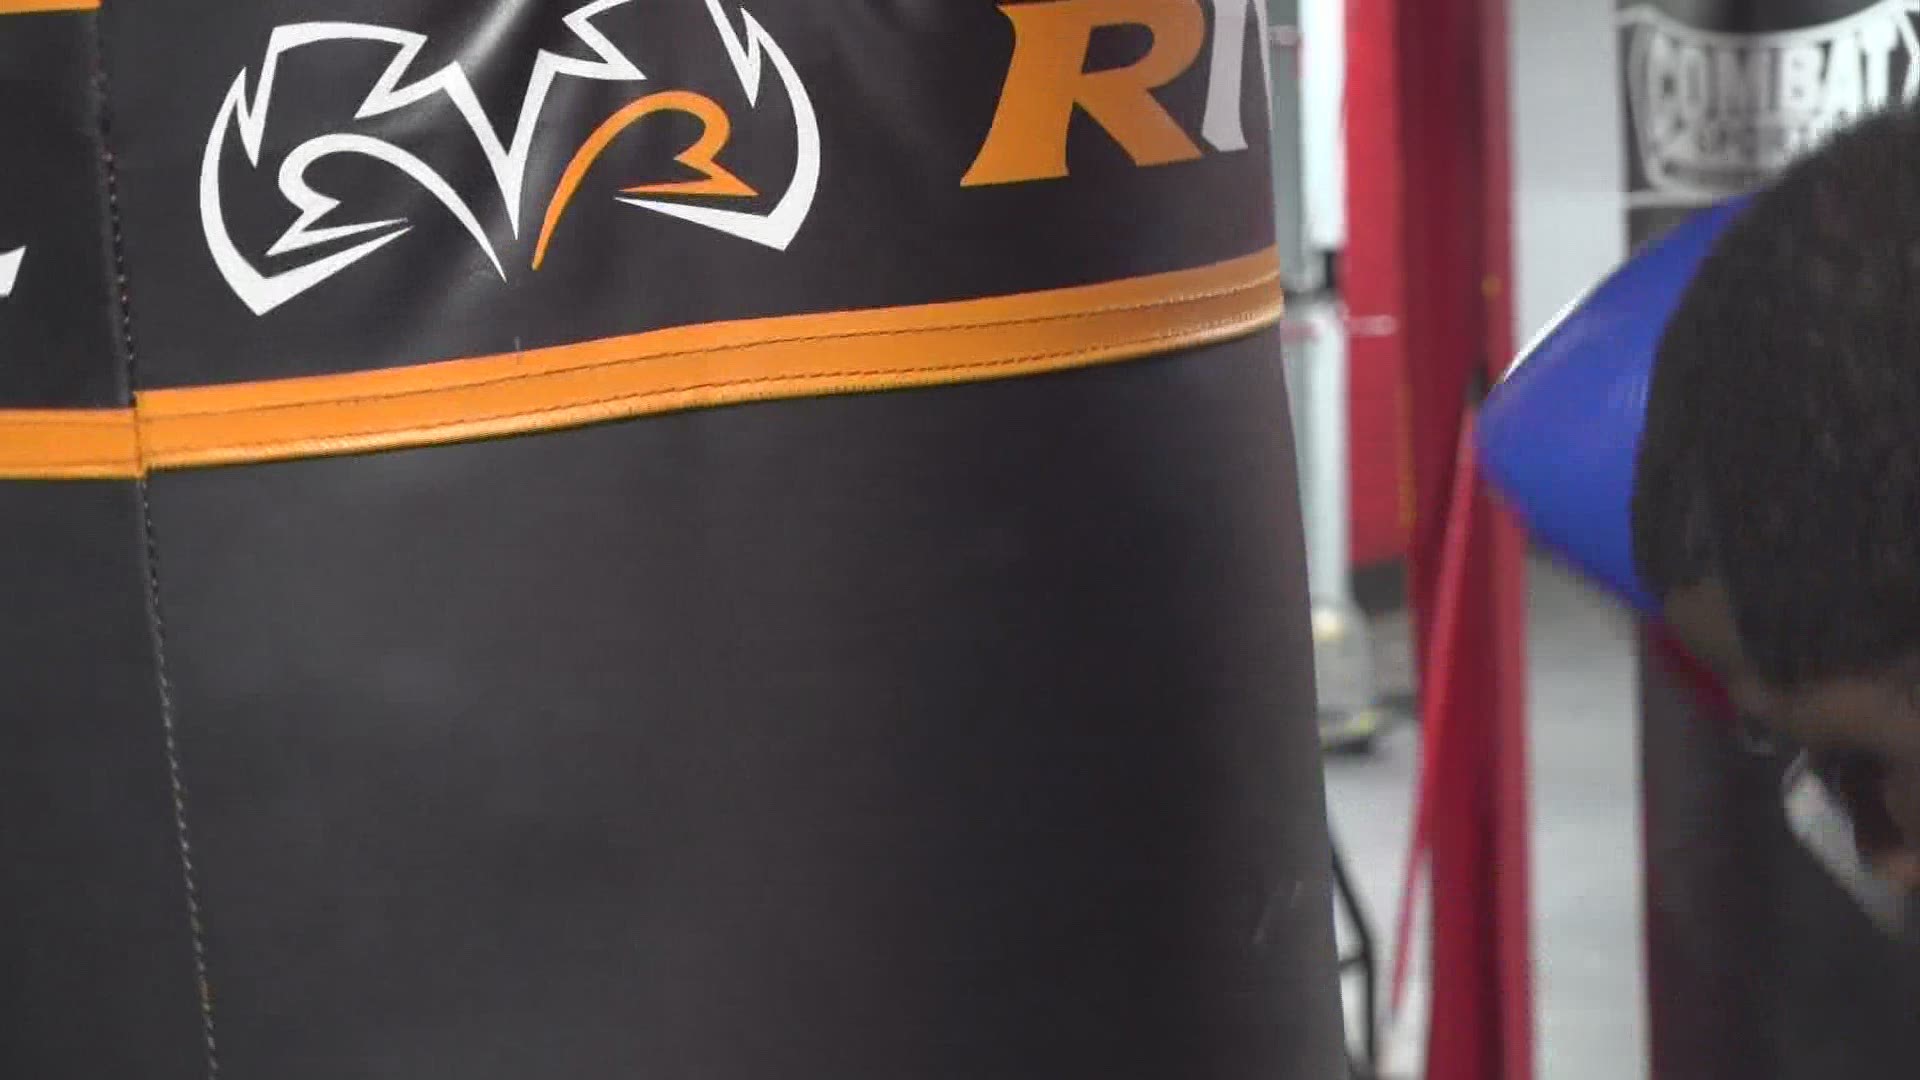 A local trainer is using boxing to help end violence.